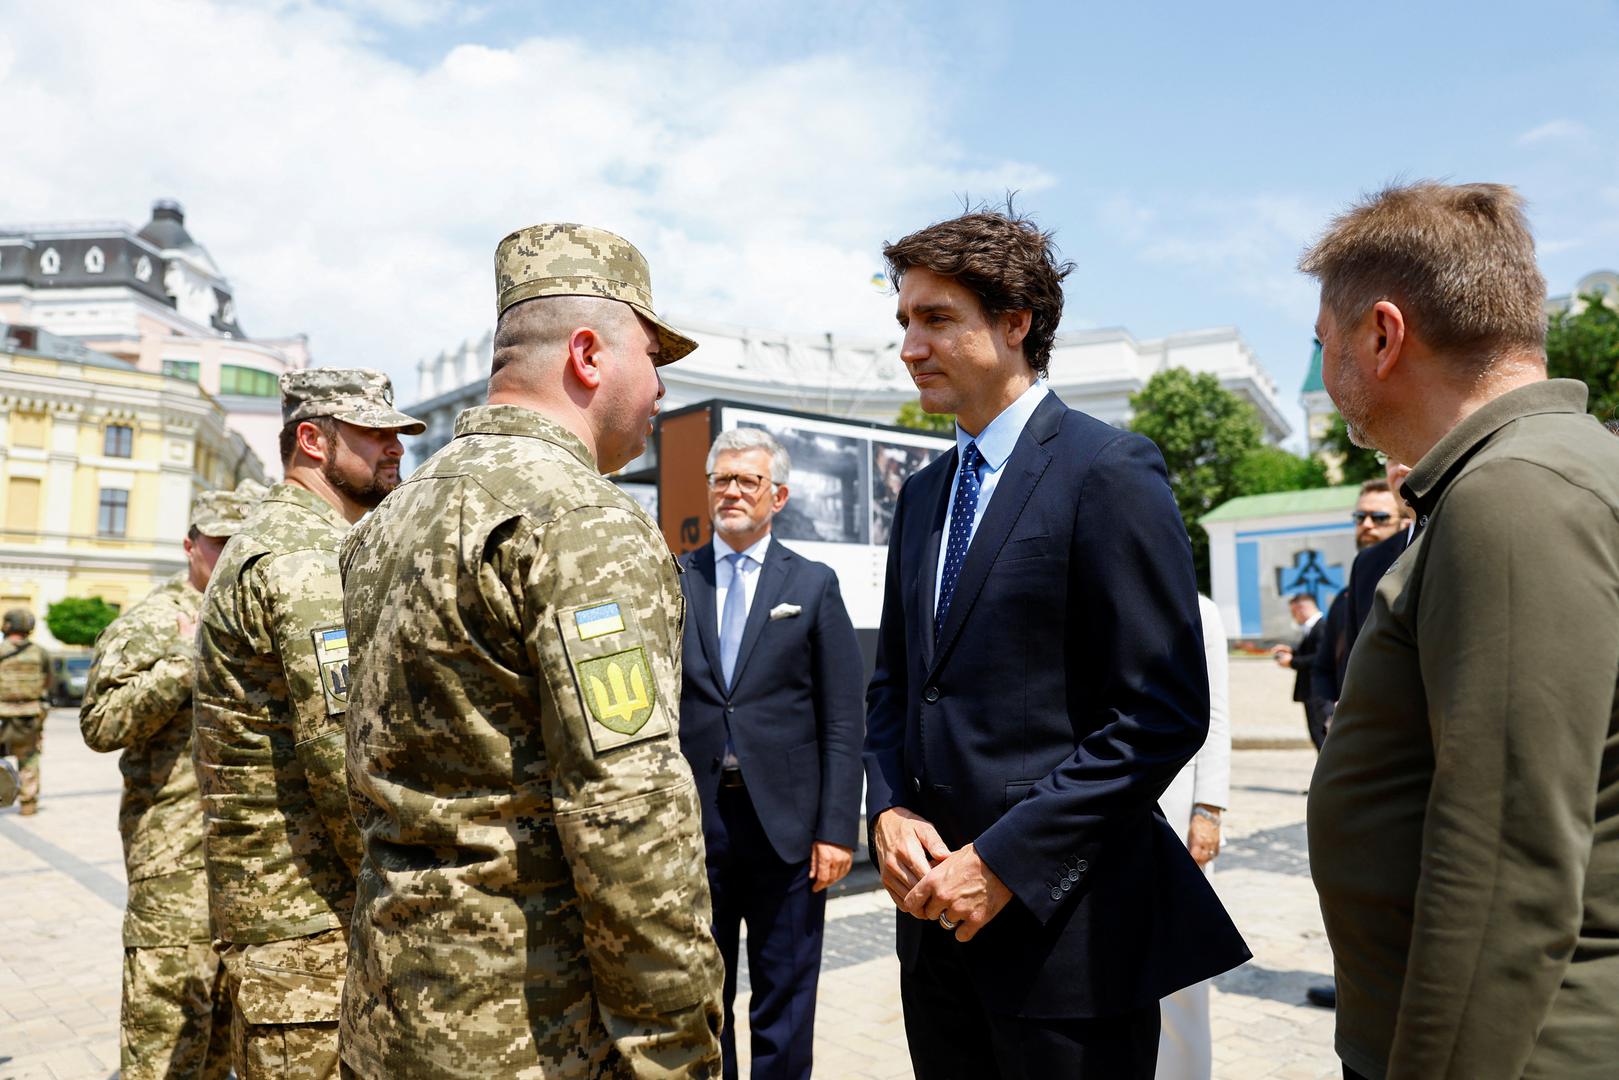 Canadian Prime Minister Justin Trudeau speaks with Ukrainian soldiers as he visits the Wall of Remembrance to pay tribute to killed Ukrainian soldiers, amid Russia's attack on Ukraine, in Kyiv, Ukraine June 10, 2023. REUTERS/Valentyn Ogirenko/Pool Photo: VALENTYN OGIRENKO/REUTERS